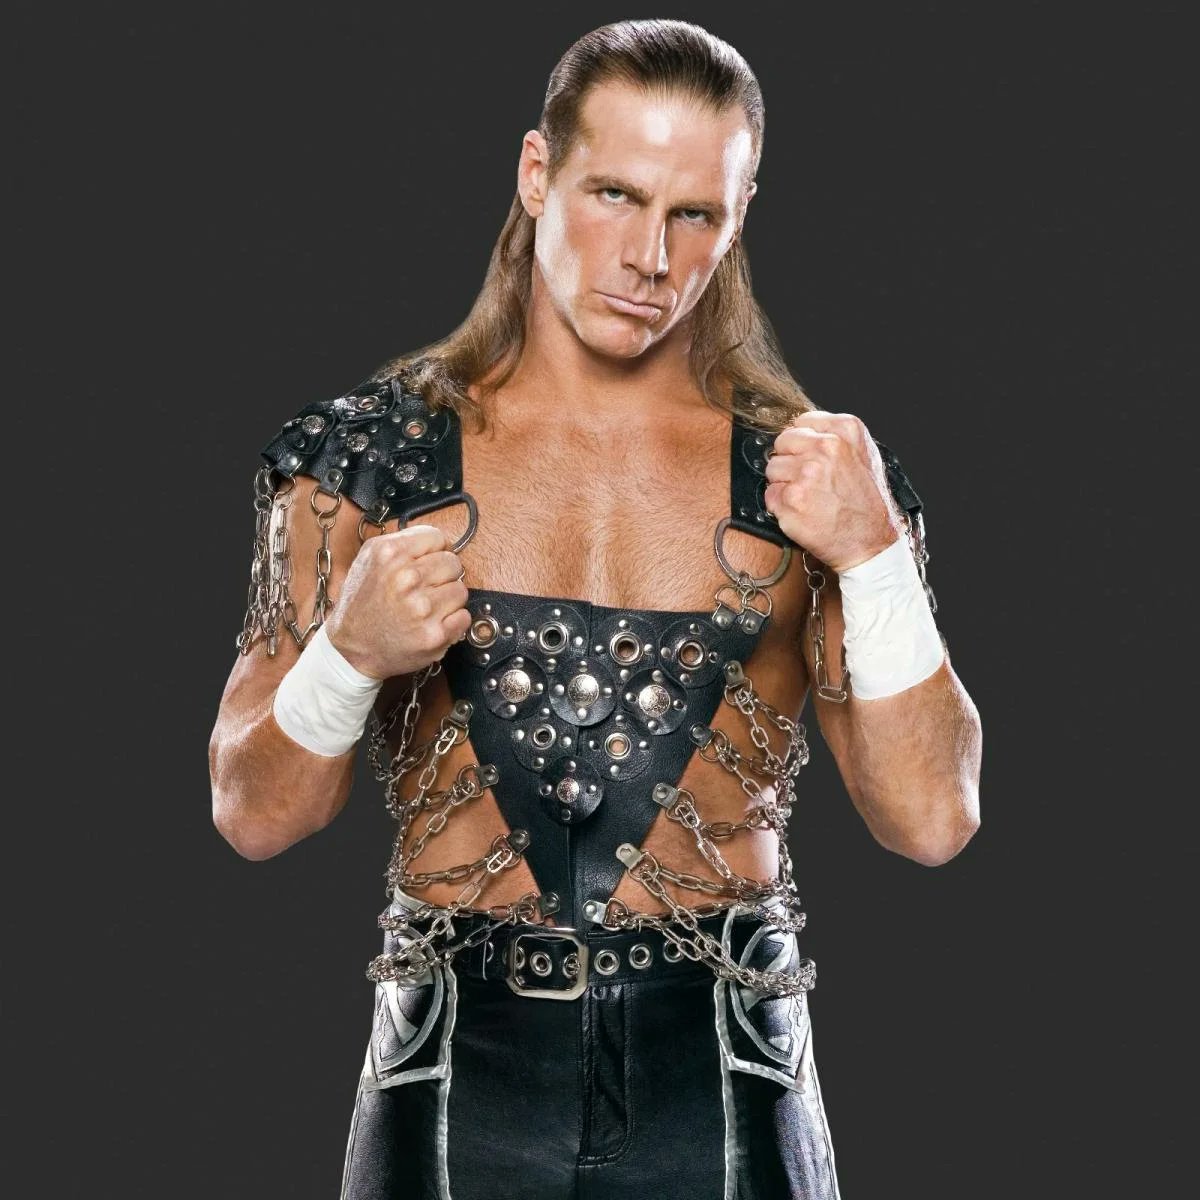 It’s so fuckin funny that Shawn Michaels' WWE character was "ladi...